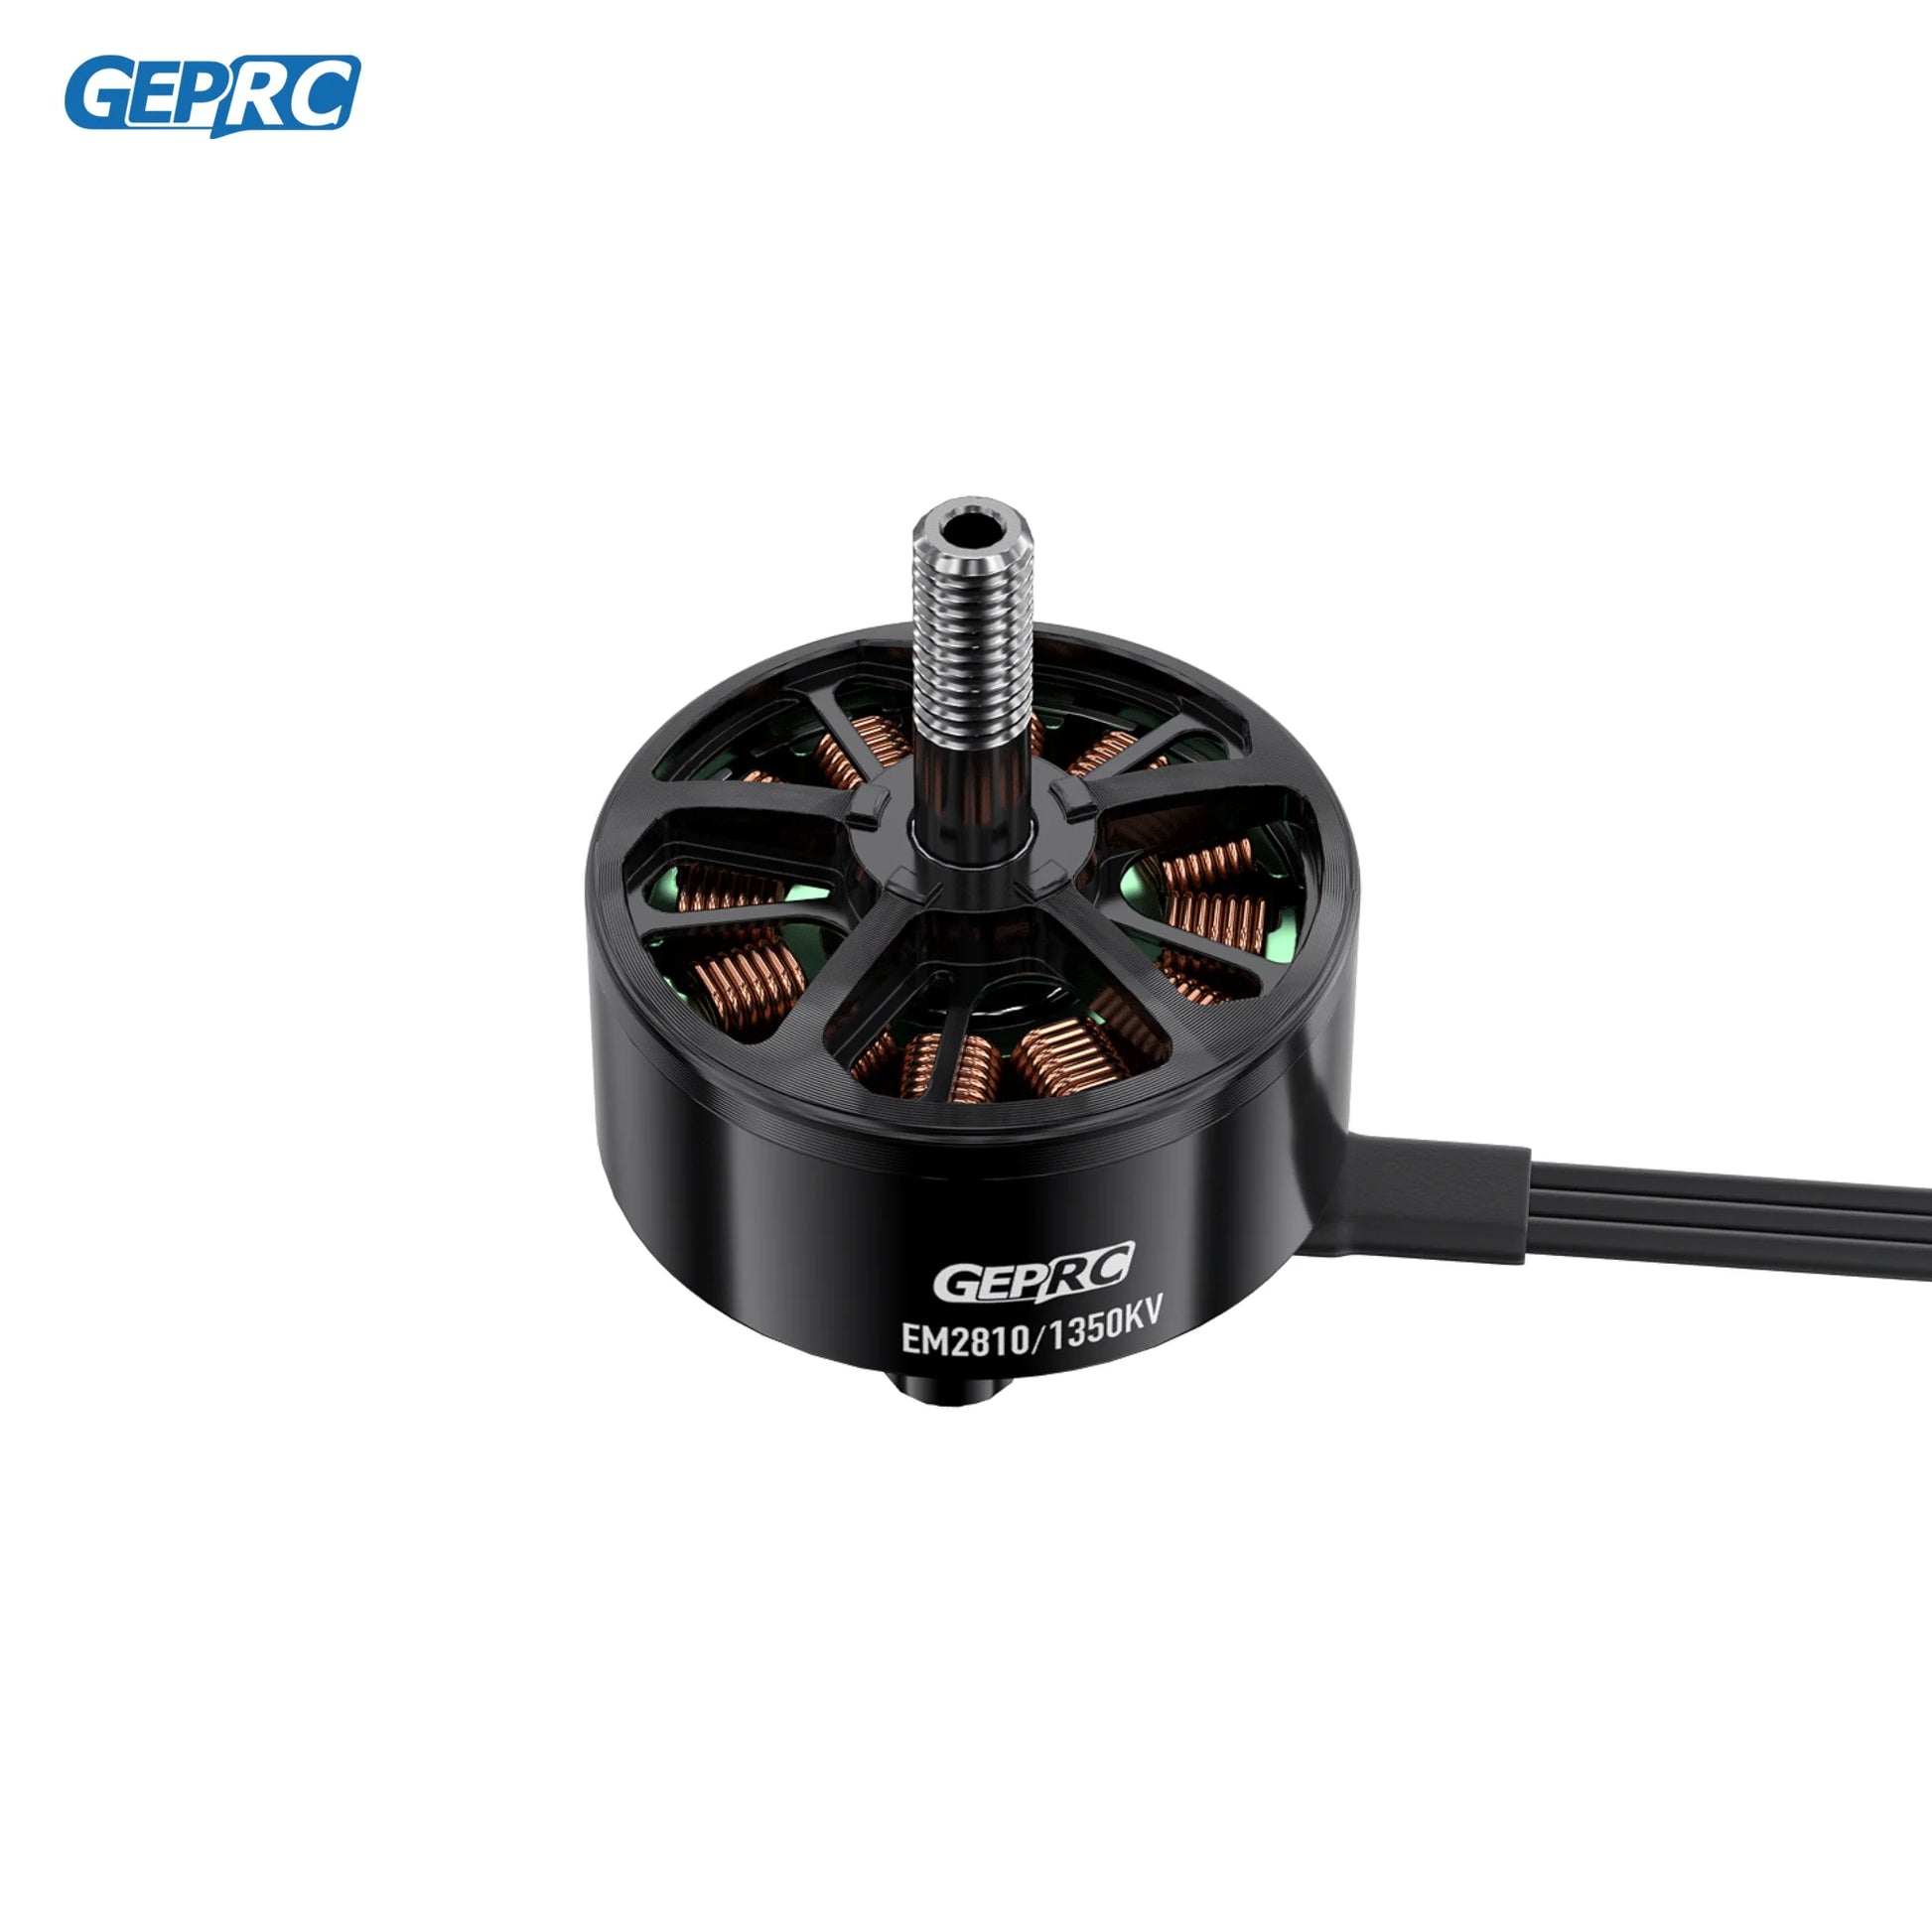 GEPRC EM2810 Motor Brushless Motor - Black with 7/8 Inch ESC 50A-60A RC FPV Racing Drone Multicopter Accessories